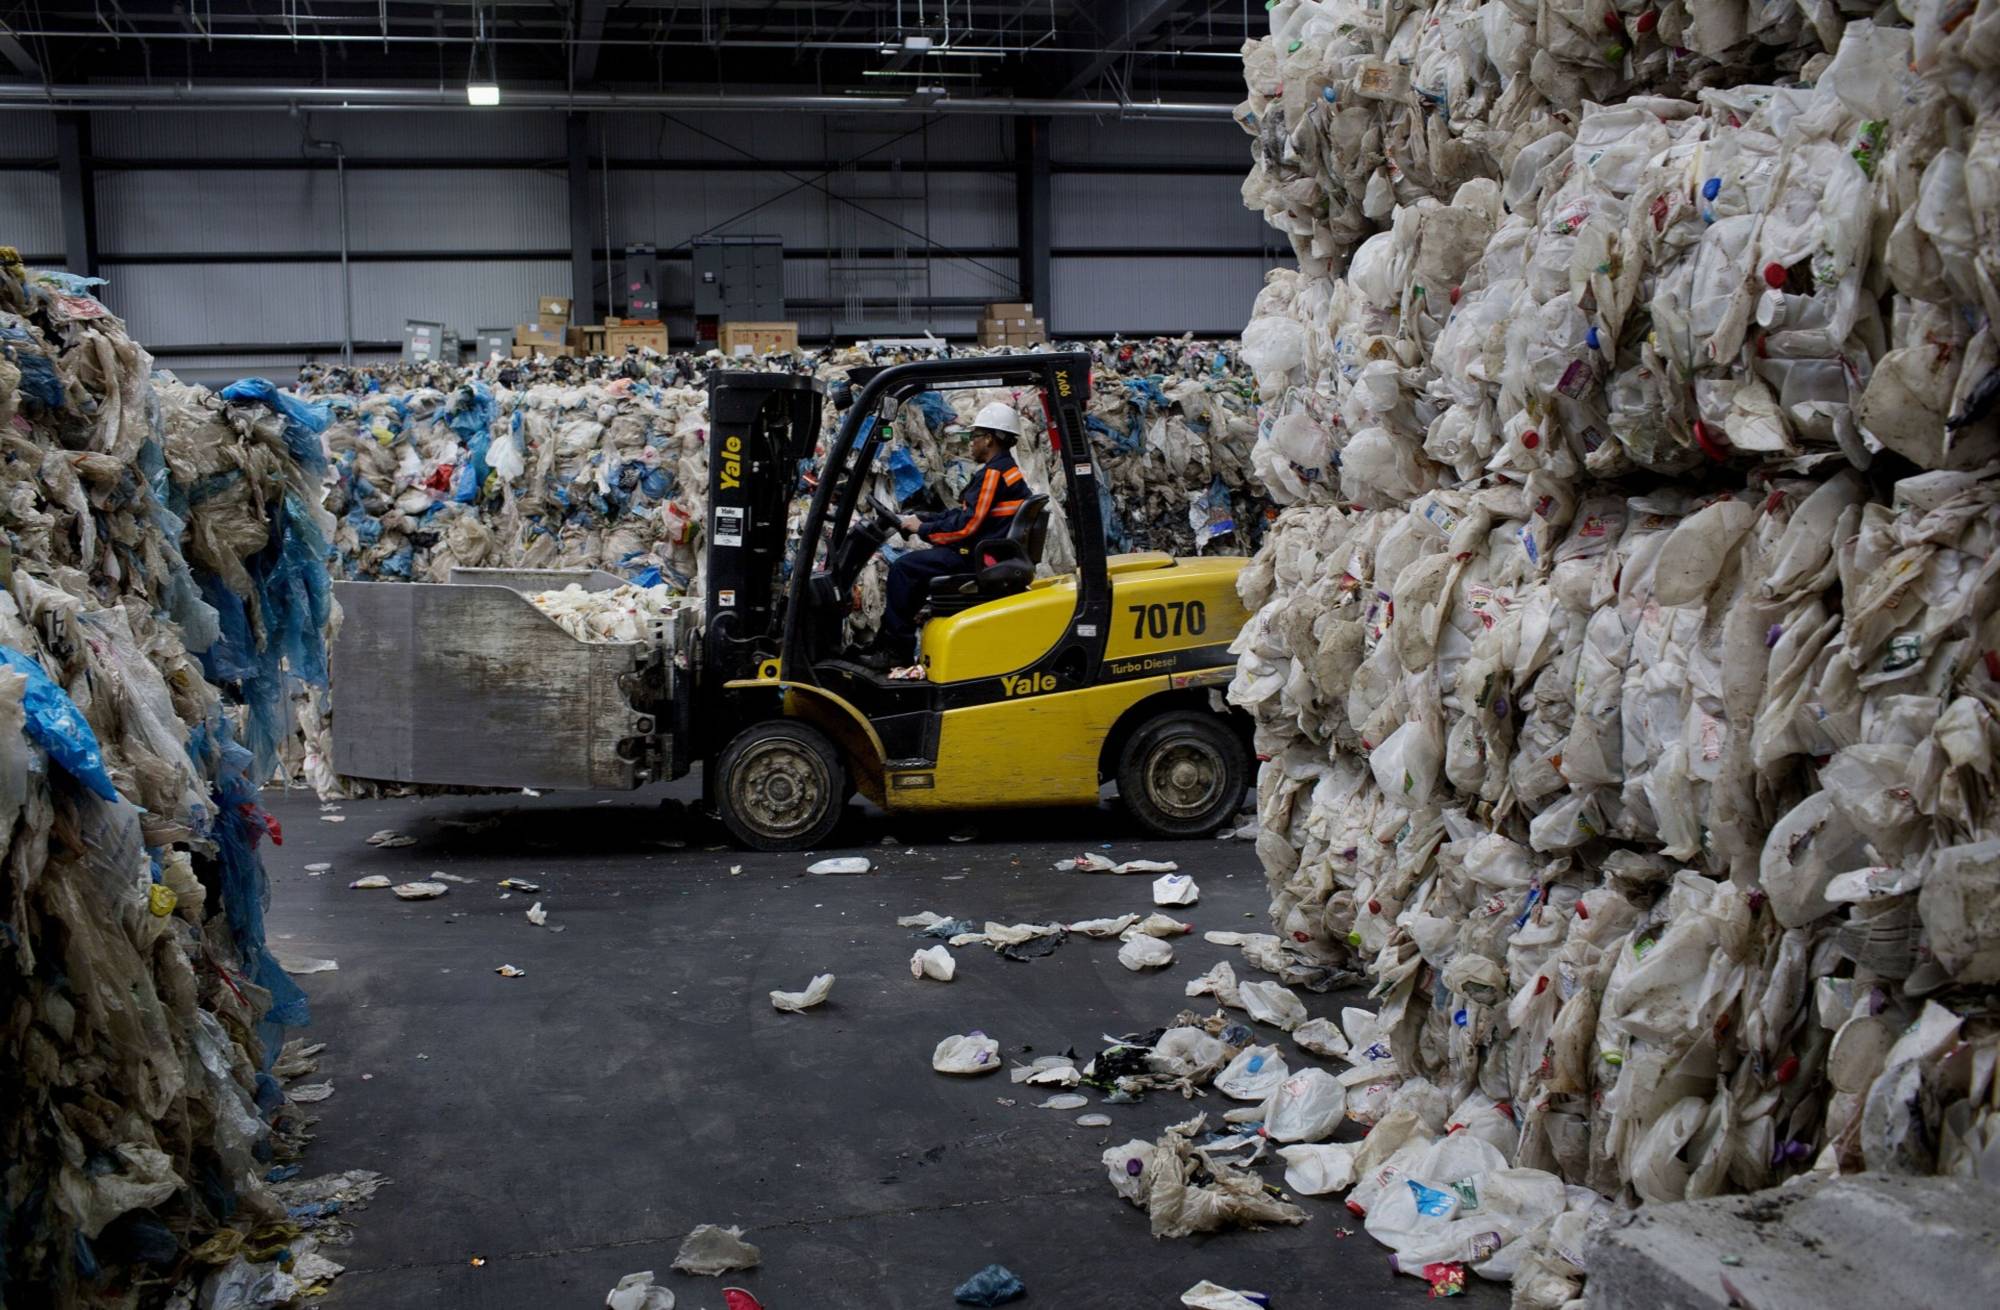 A worker moves bales of plastic bottles for recycling at the Sims Municipal Recycling facility in the Brooklyn borough of New York in 2014. | BLOOMBERG